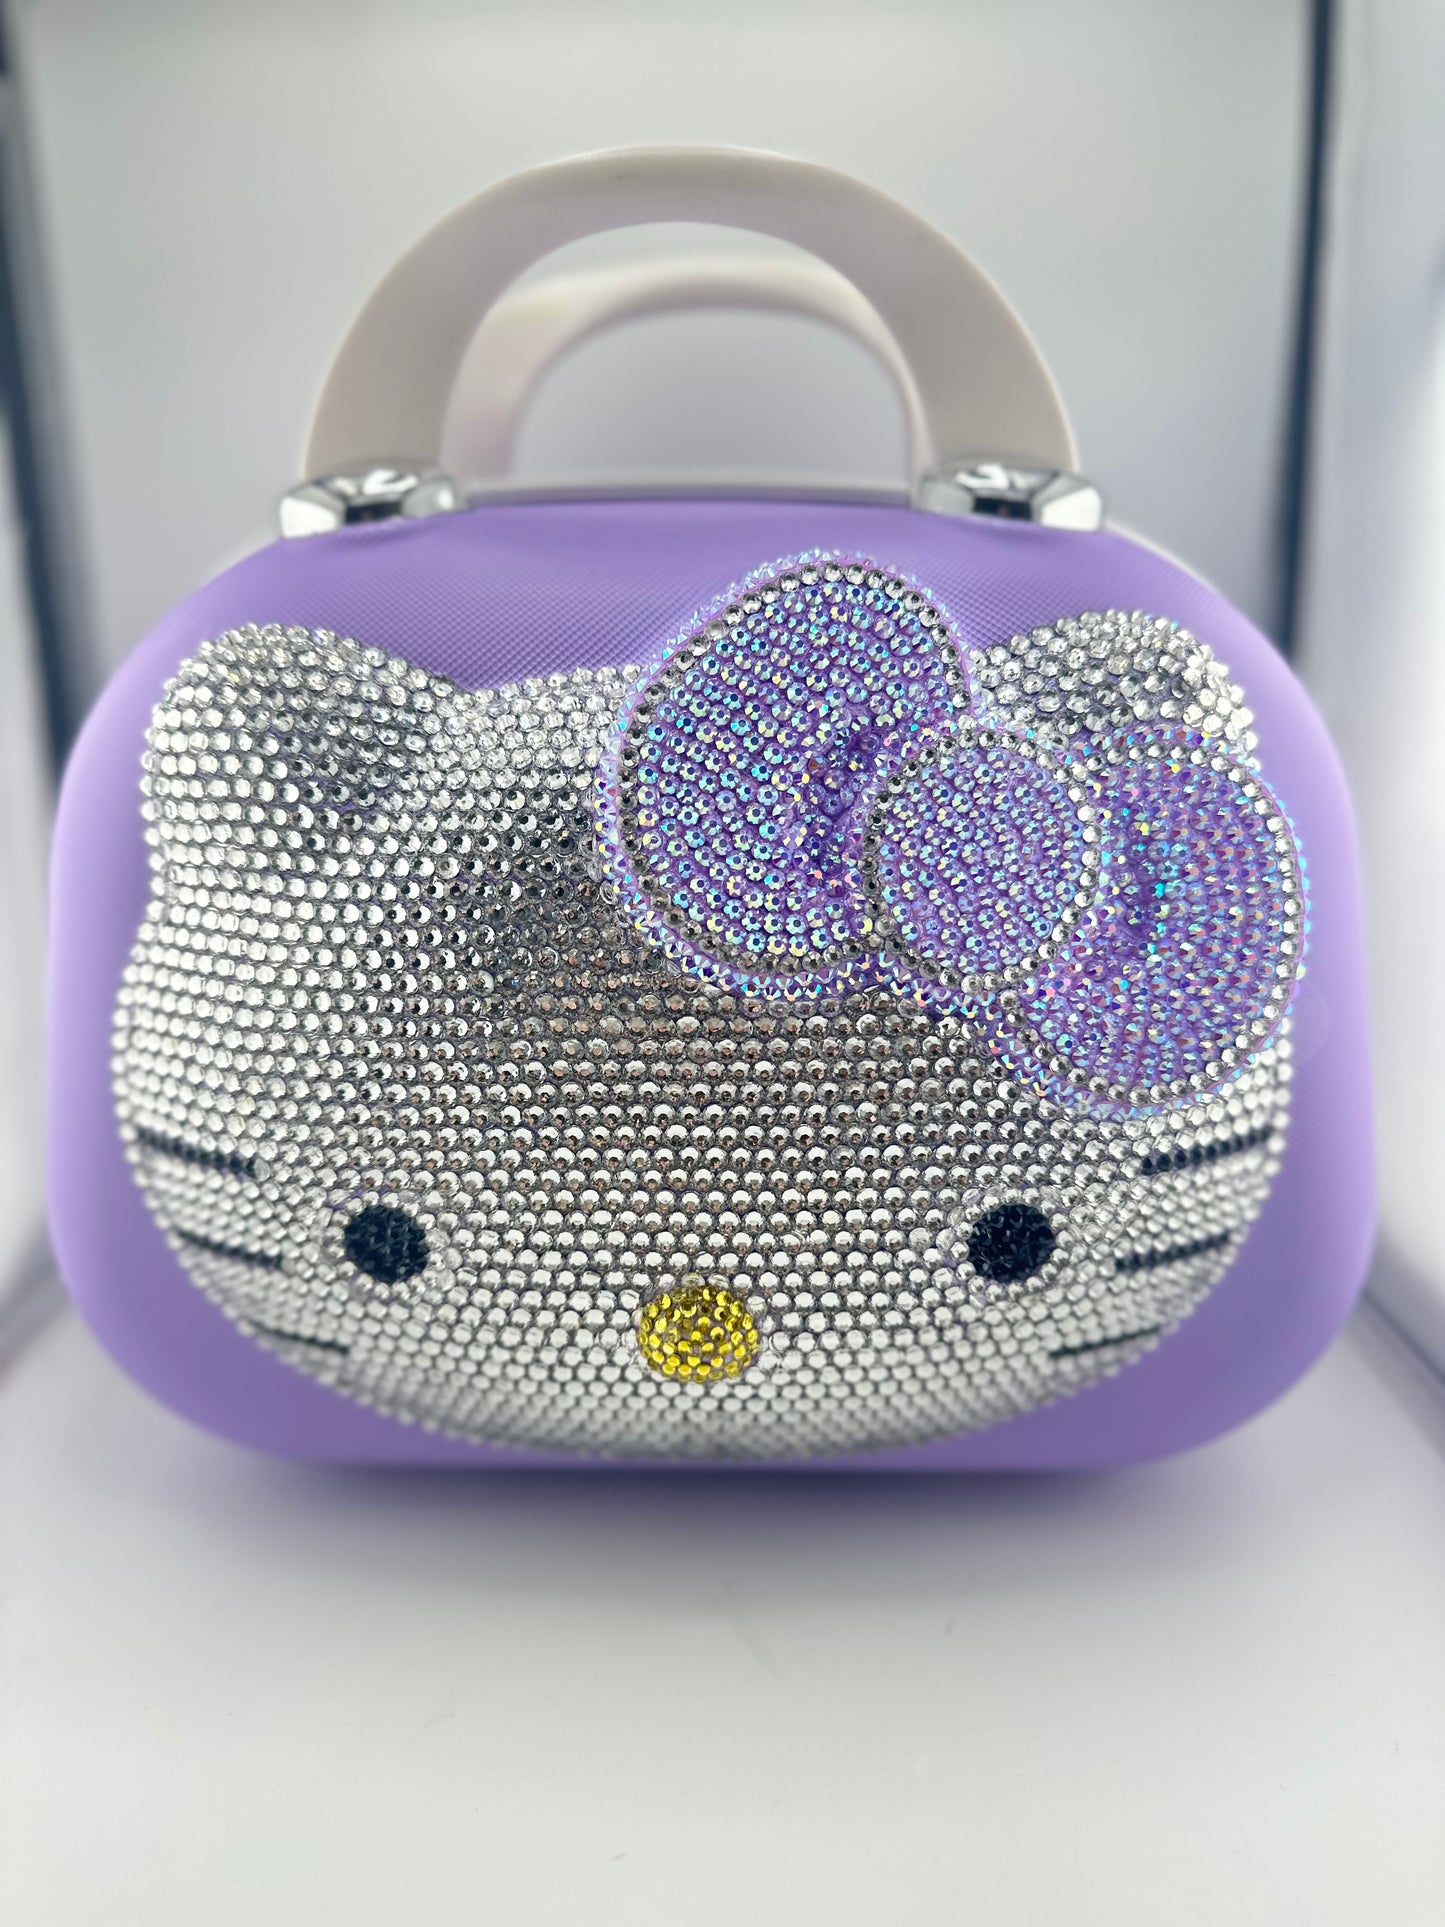 Bling Purple Hello Kitty Carry On Case